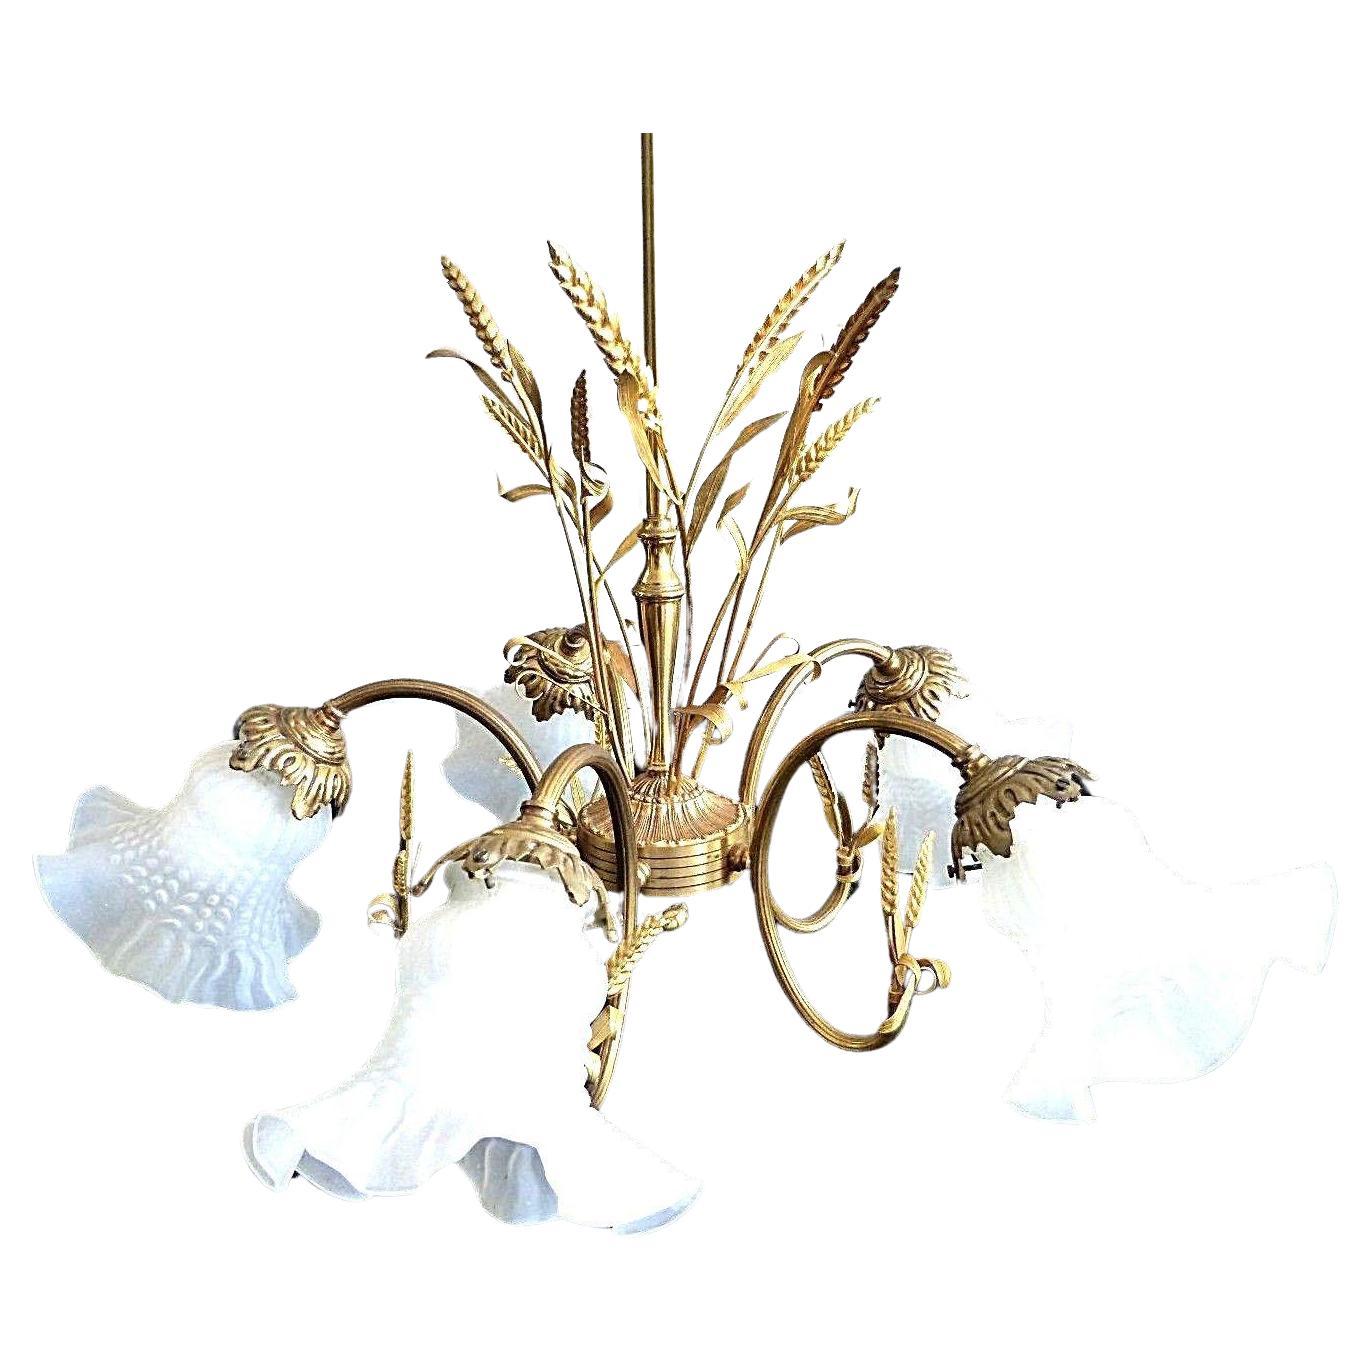 1950's Mid Century Modern Gilt Metal Sheaf of Wheat Chandelier with Floral Form Shades. Miami Beach estate purchase.